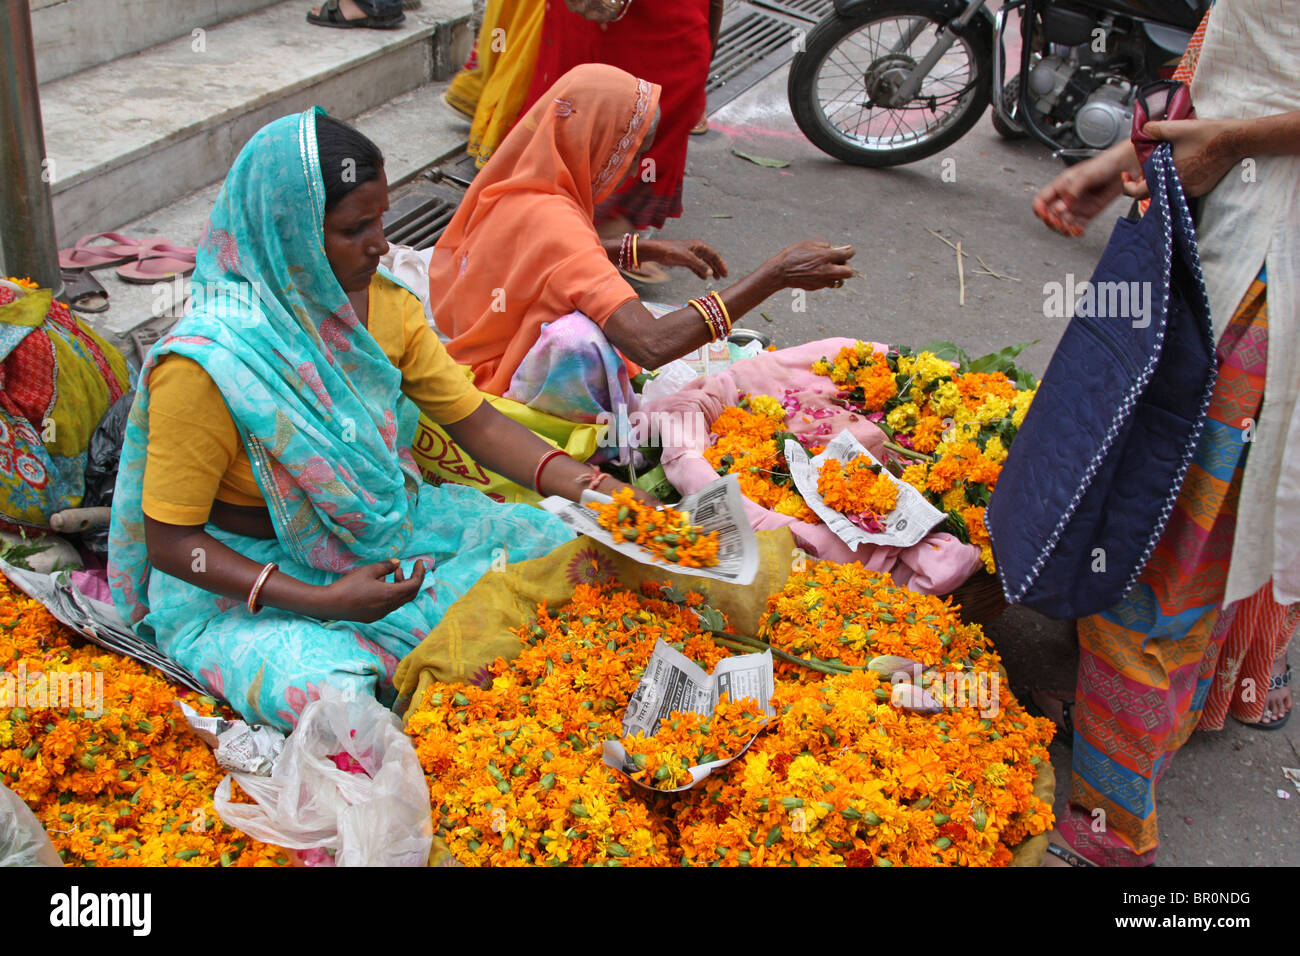 Women selling Marigold strings (garlands) at the Hindu temple for decorations during Diwali. Stock Photo